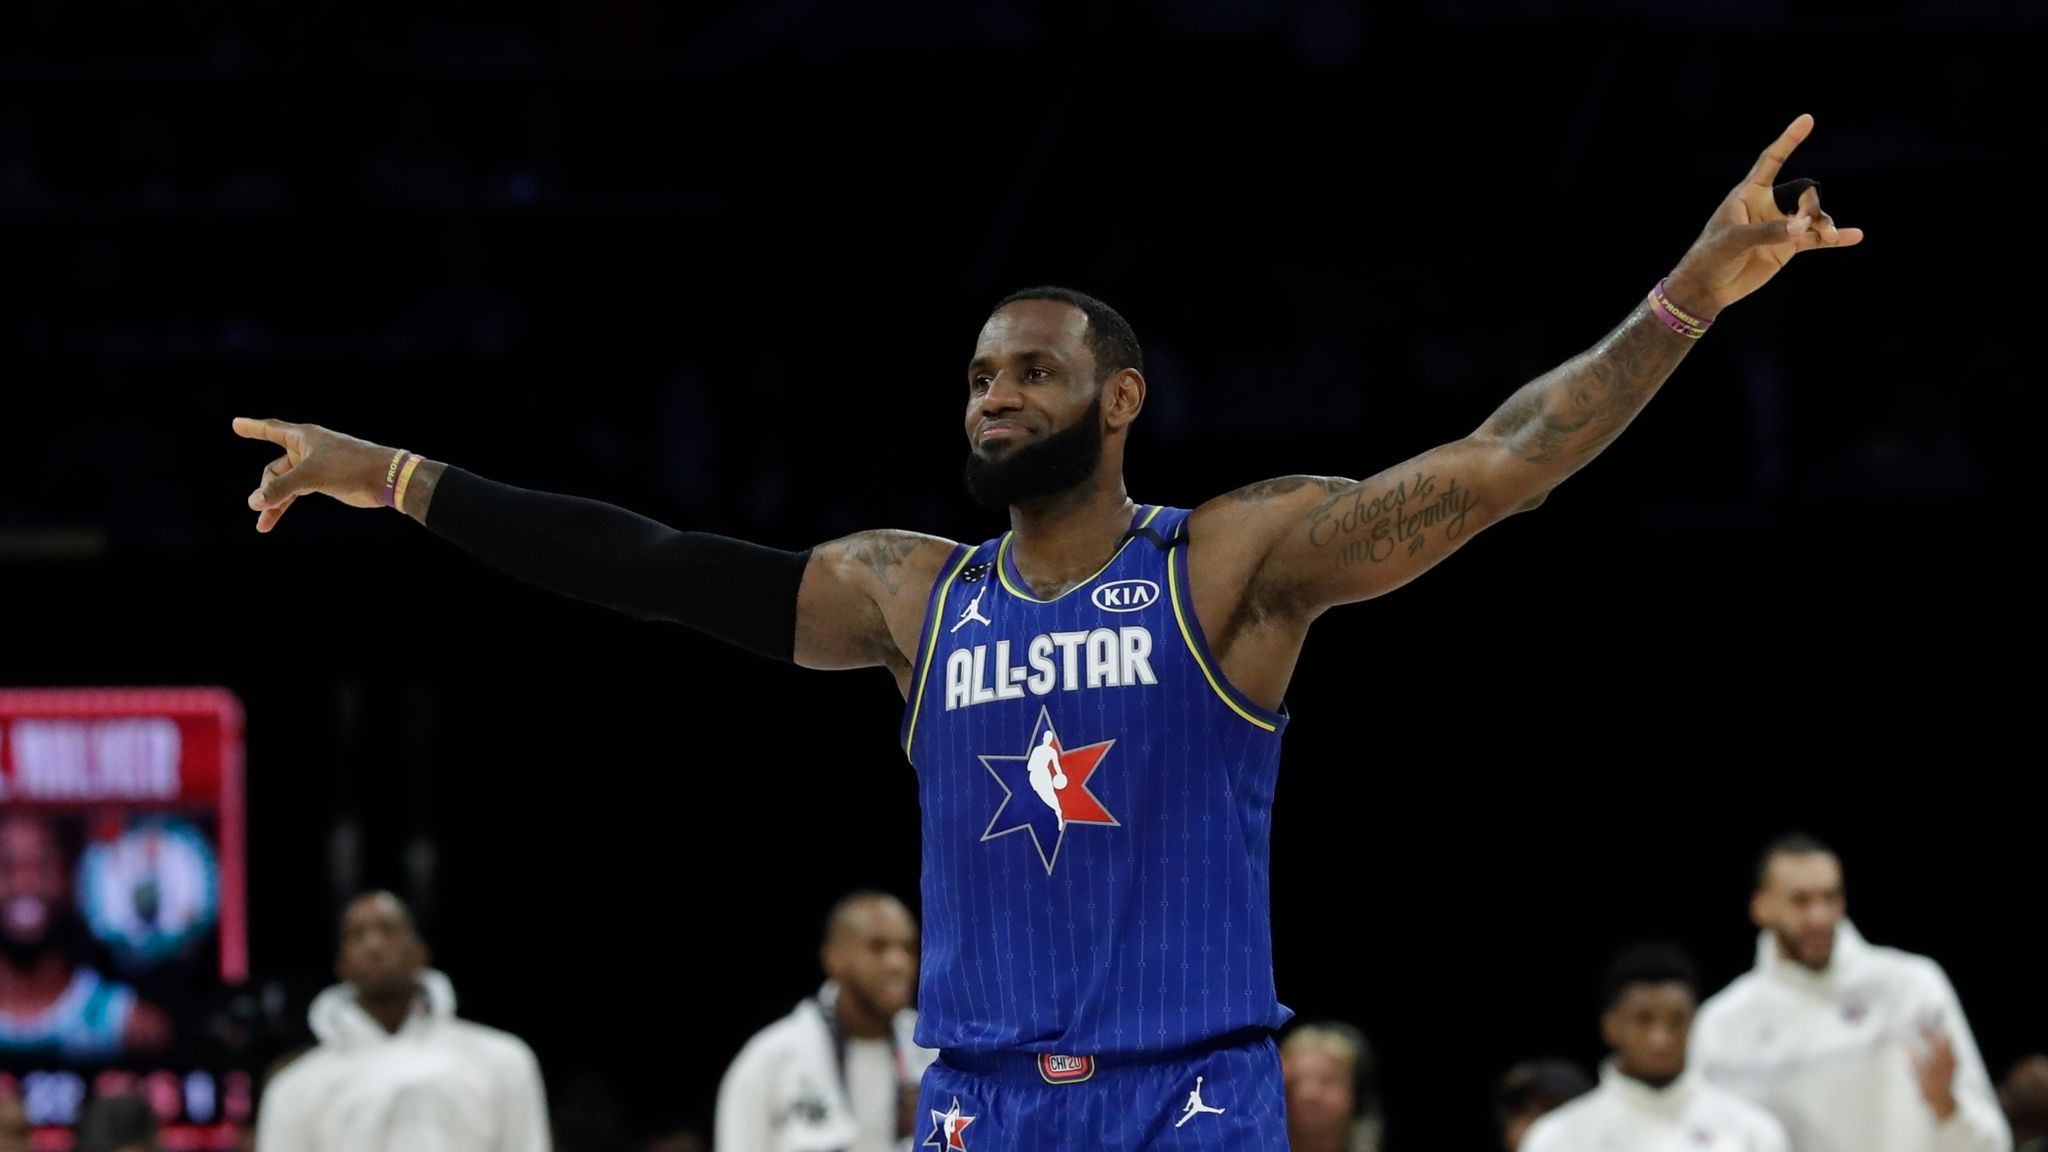 LeBron James Named Western Conference NBA All-Star 2023 Captain